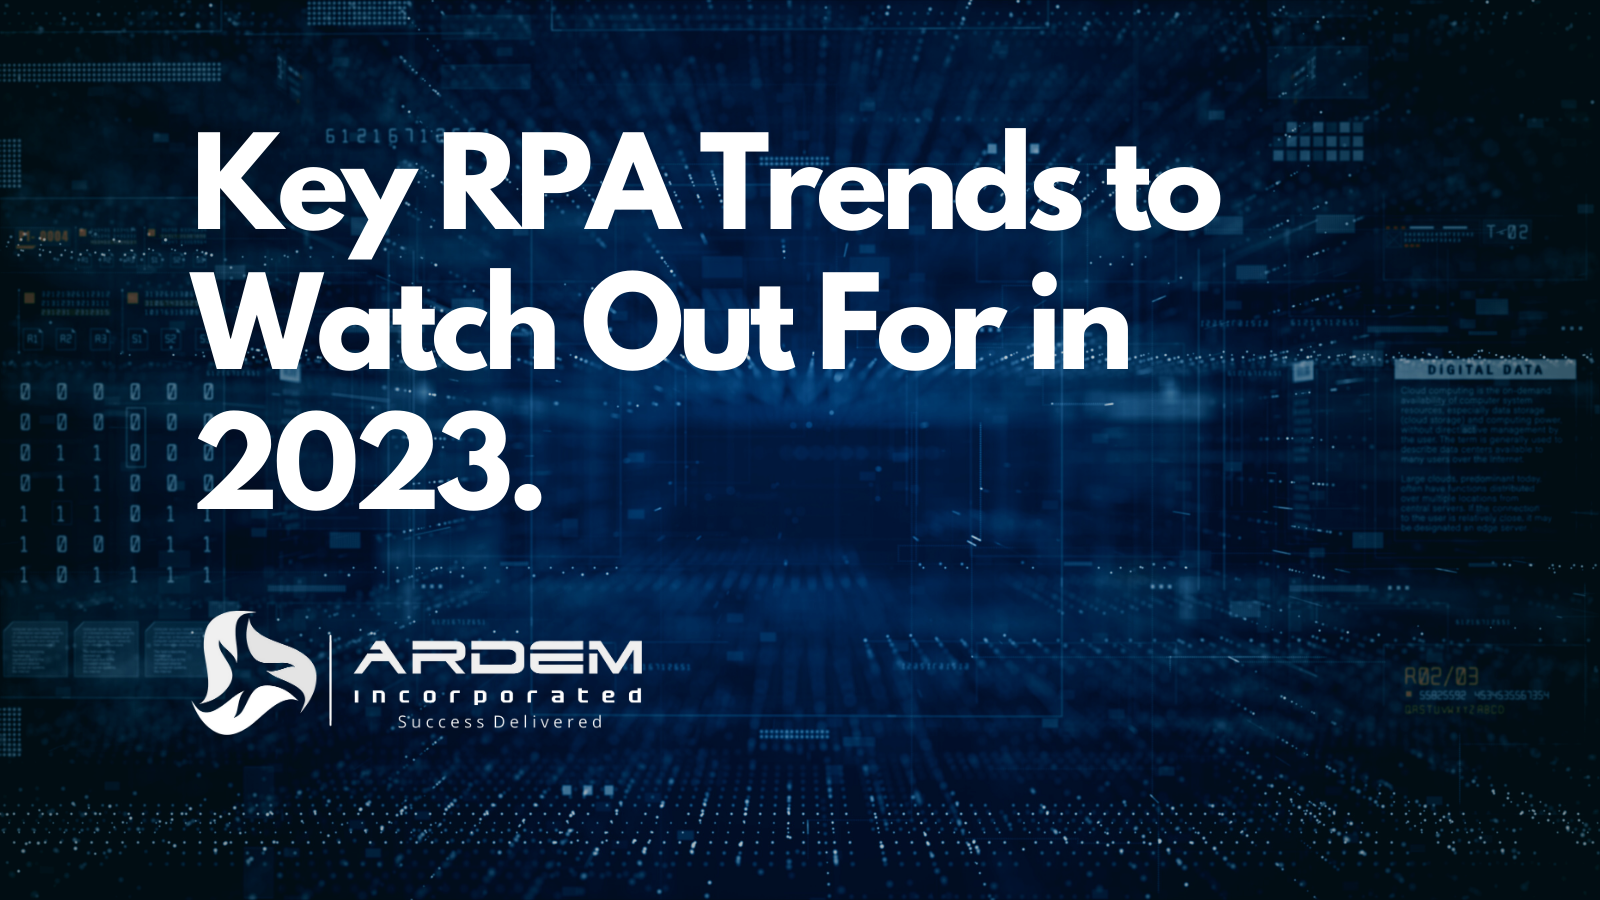 Key RPA Trends to Watch Out For in 2023.